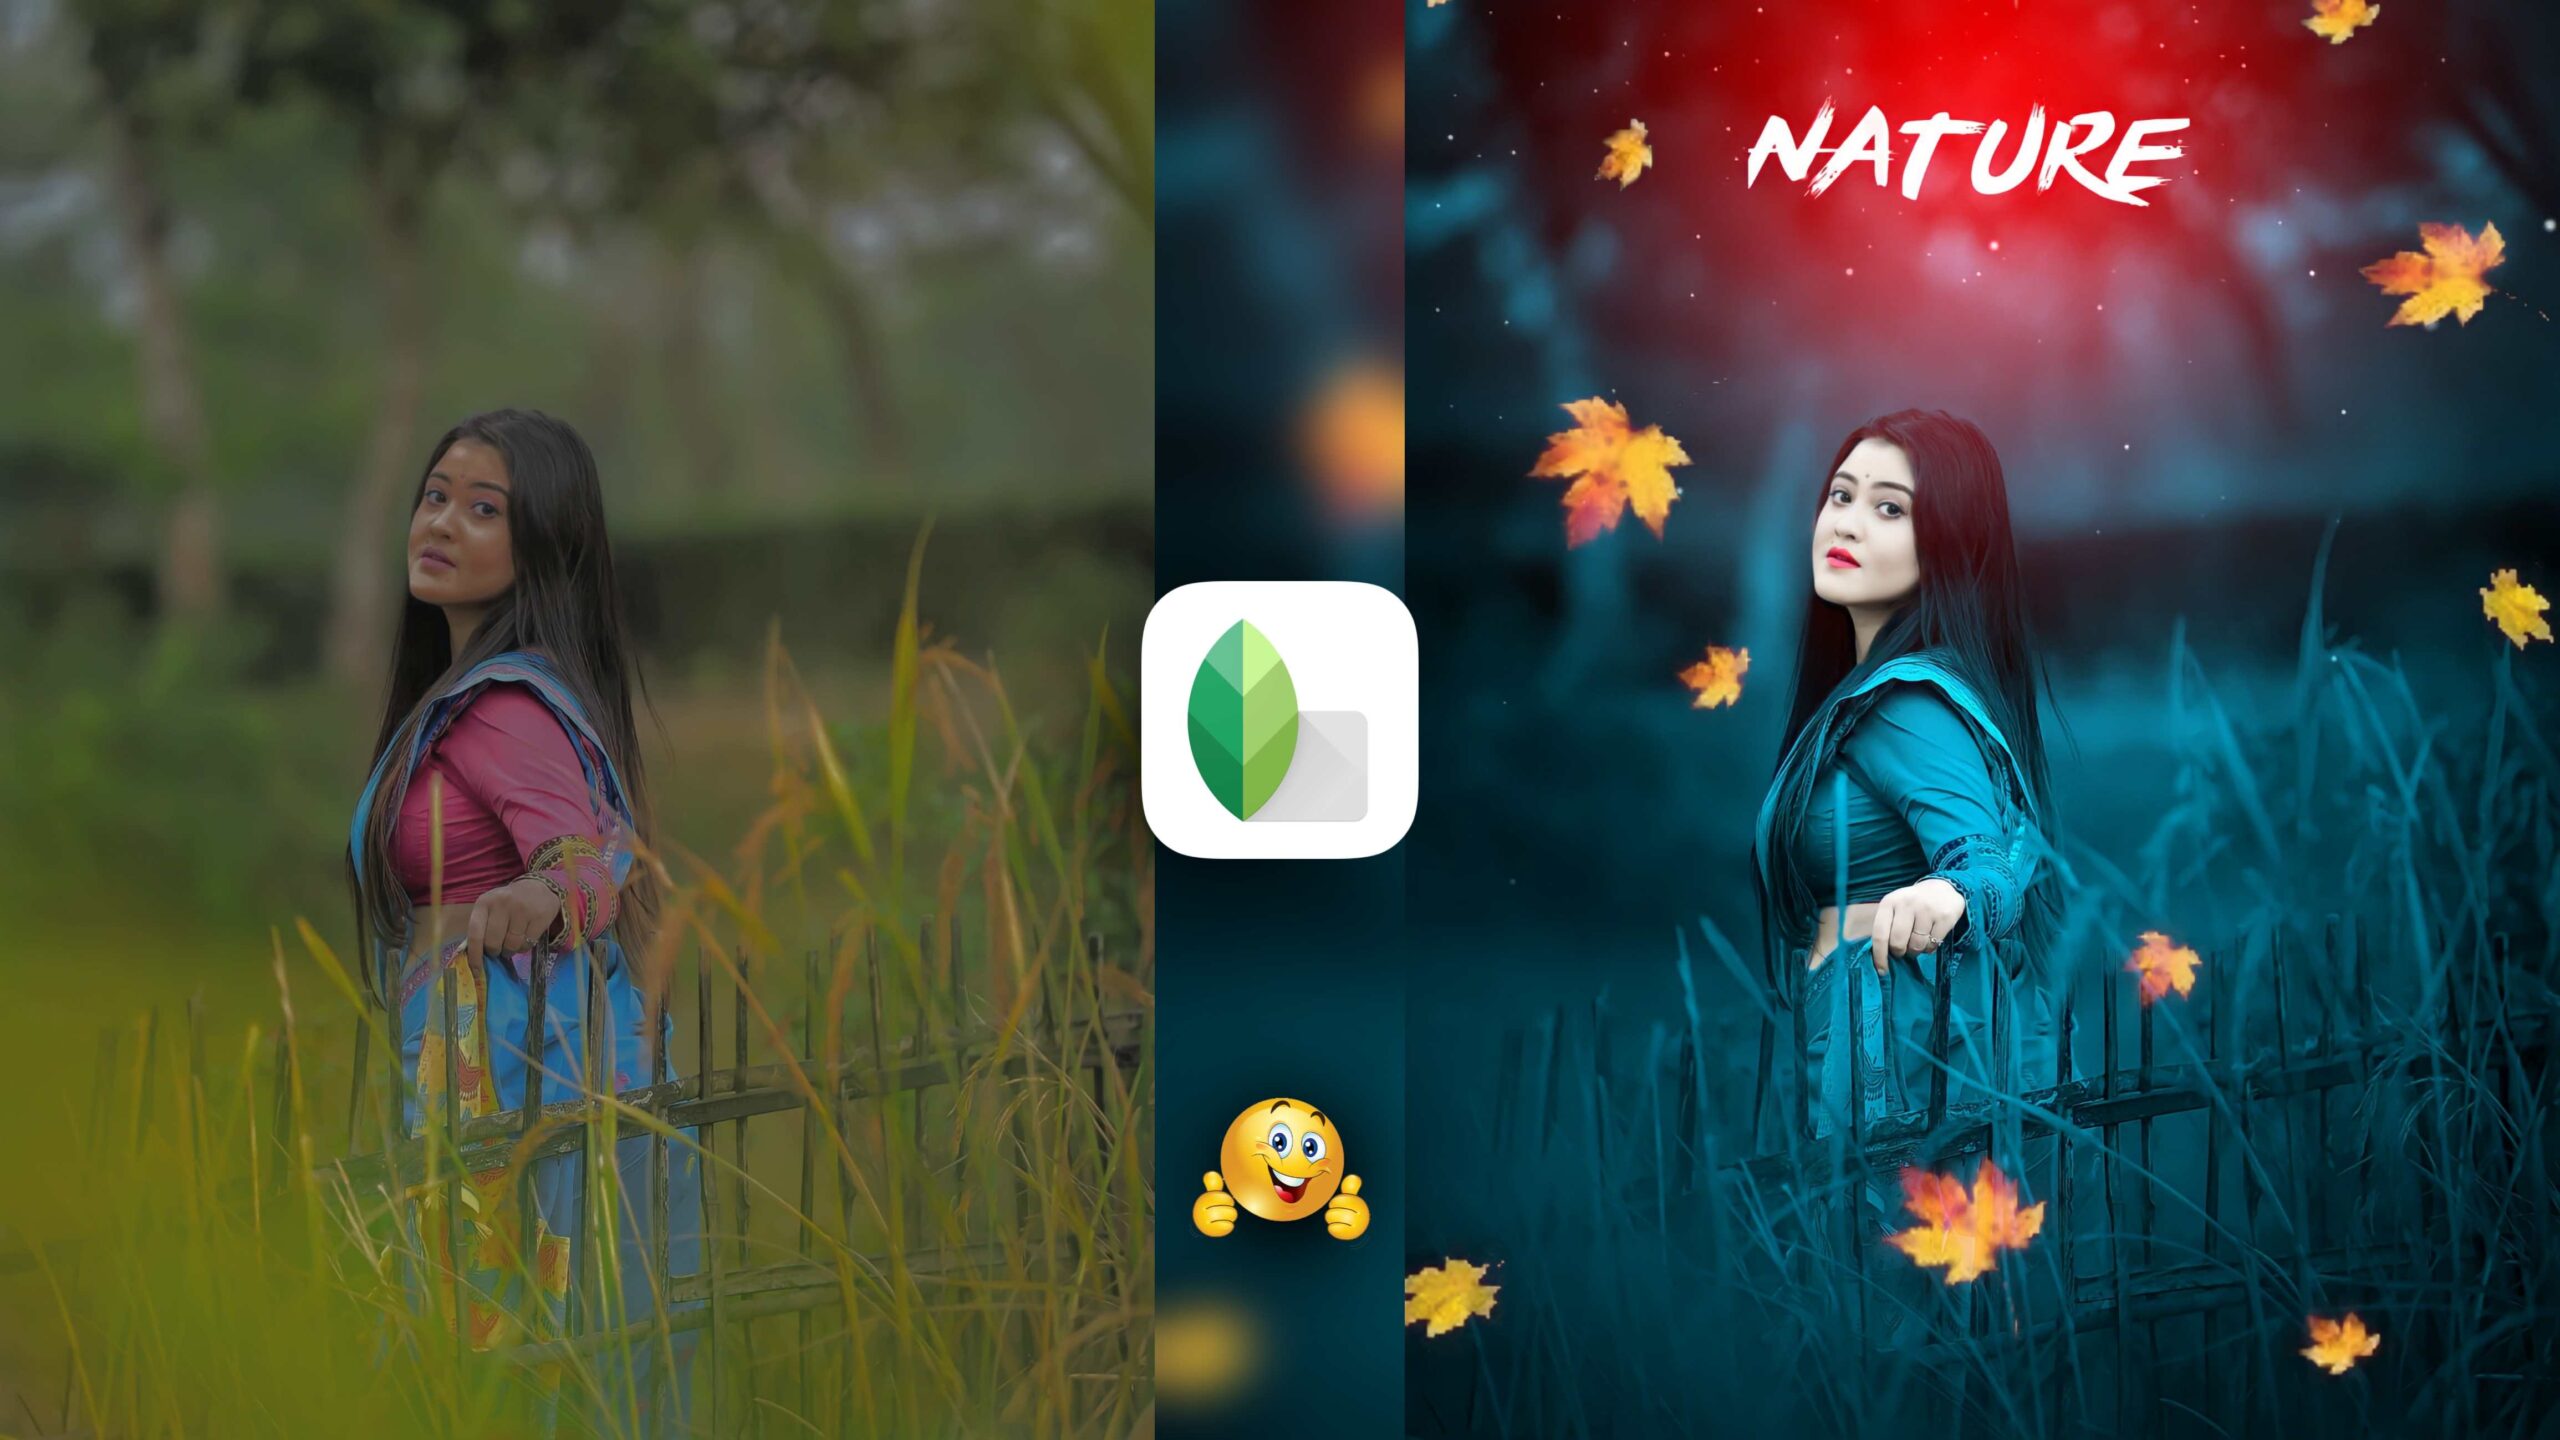 Snapseed Creative Photo Editing Tricks ? | Snapseed Blue Effect | Snapseed  Background Colour Change - MUNAWAR EDITS